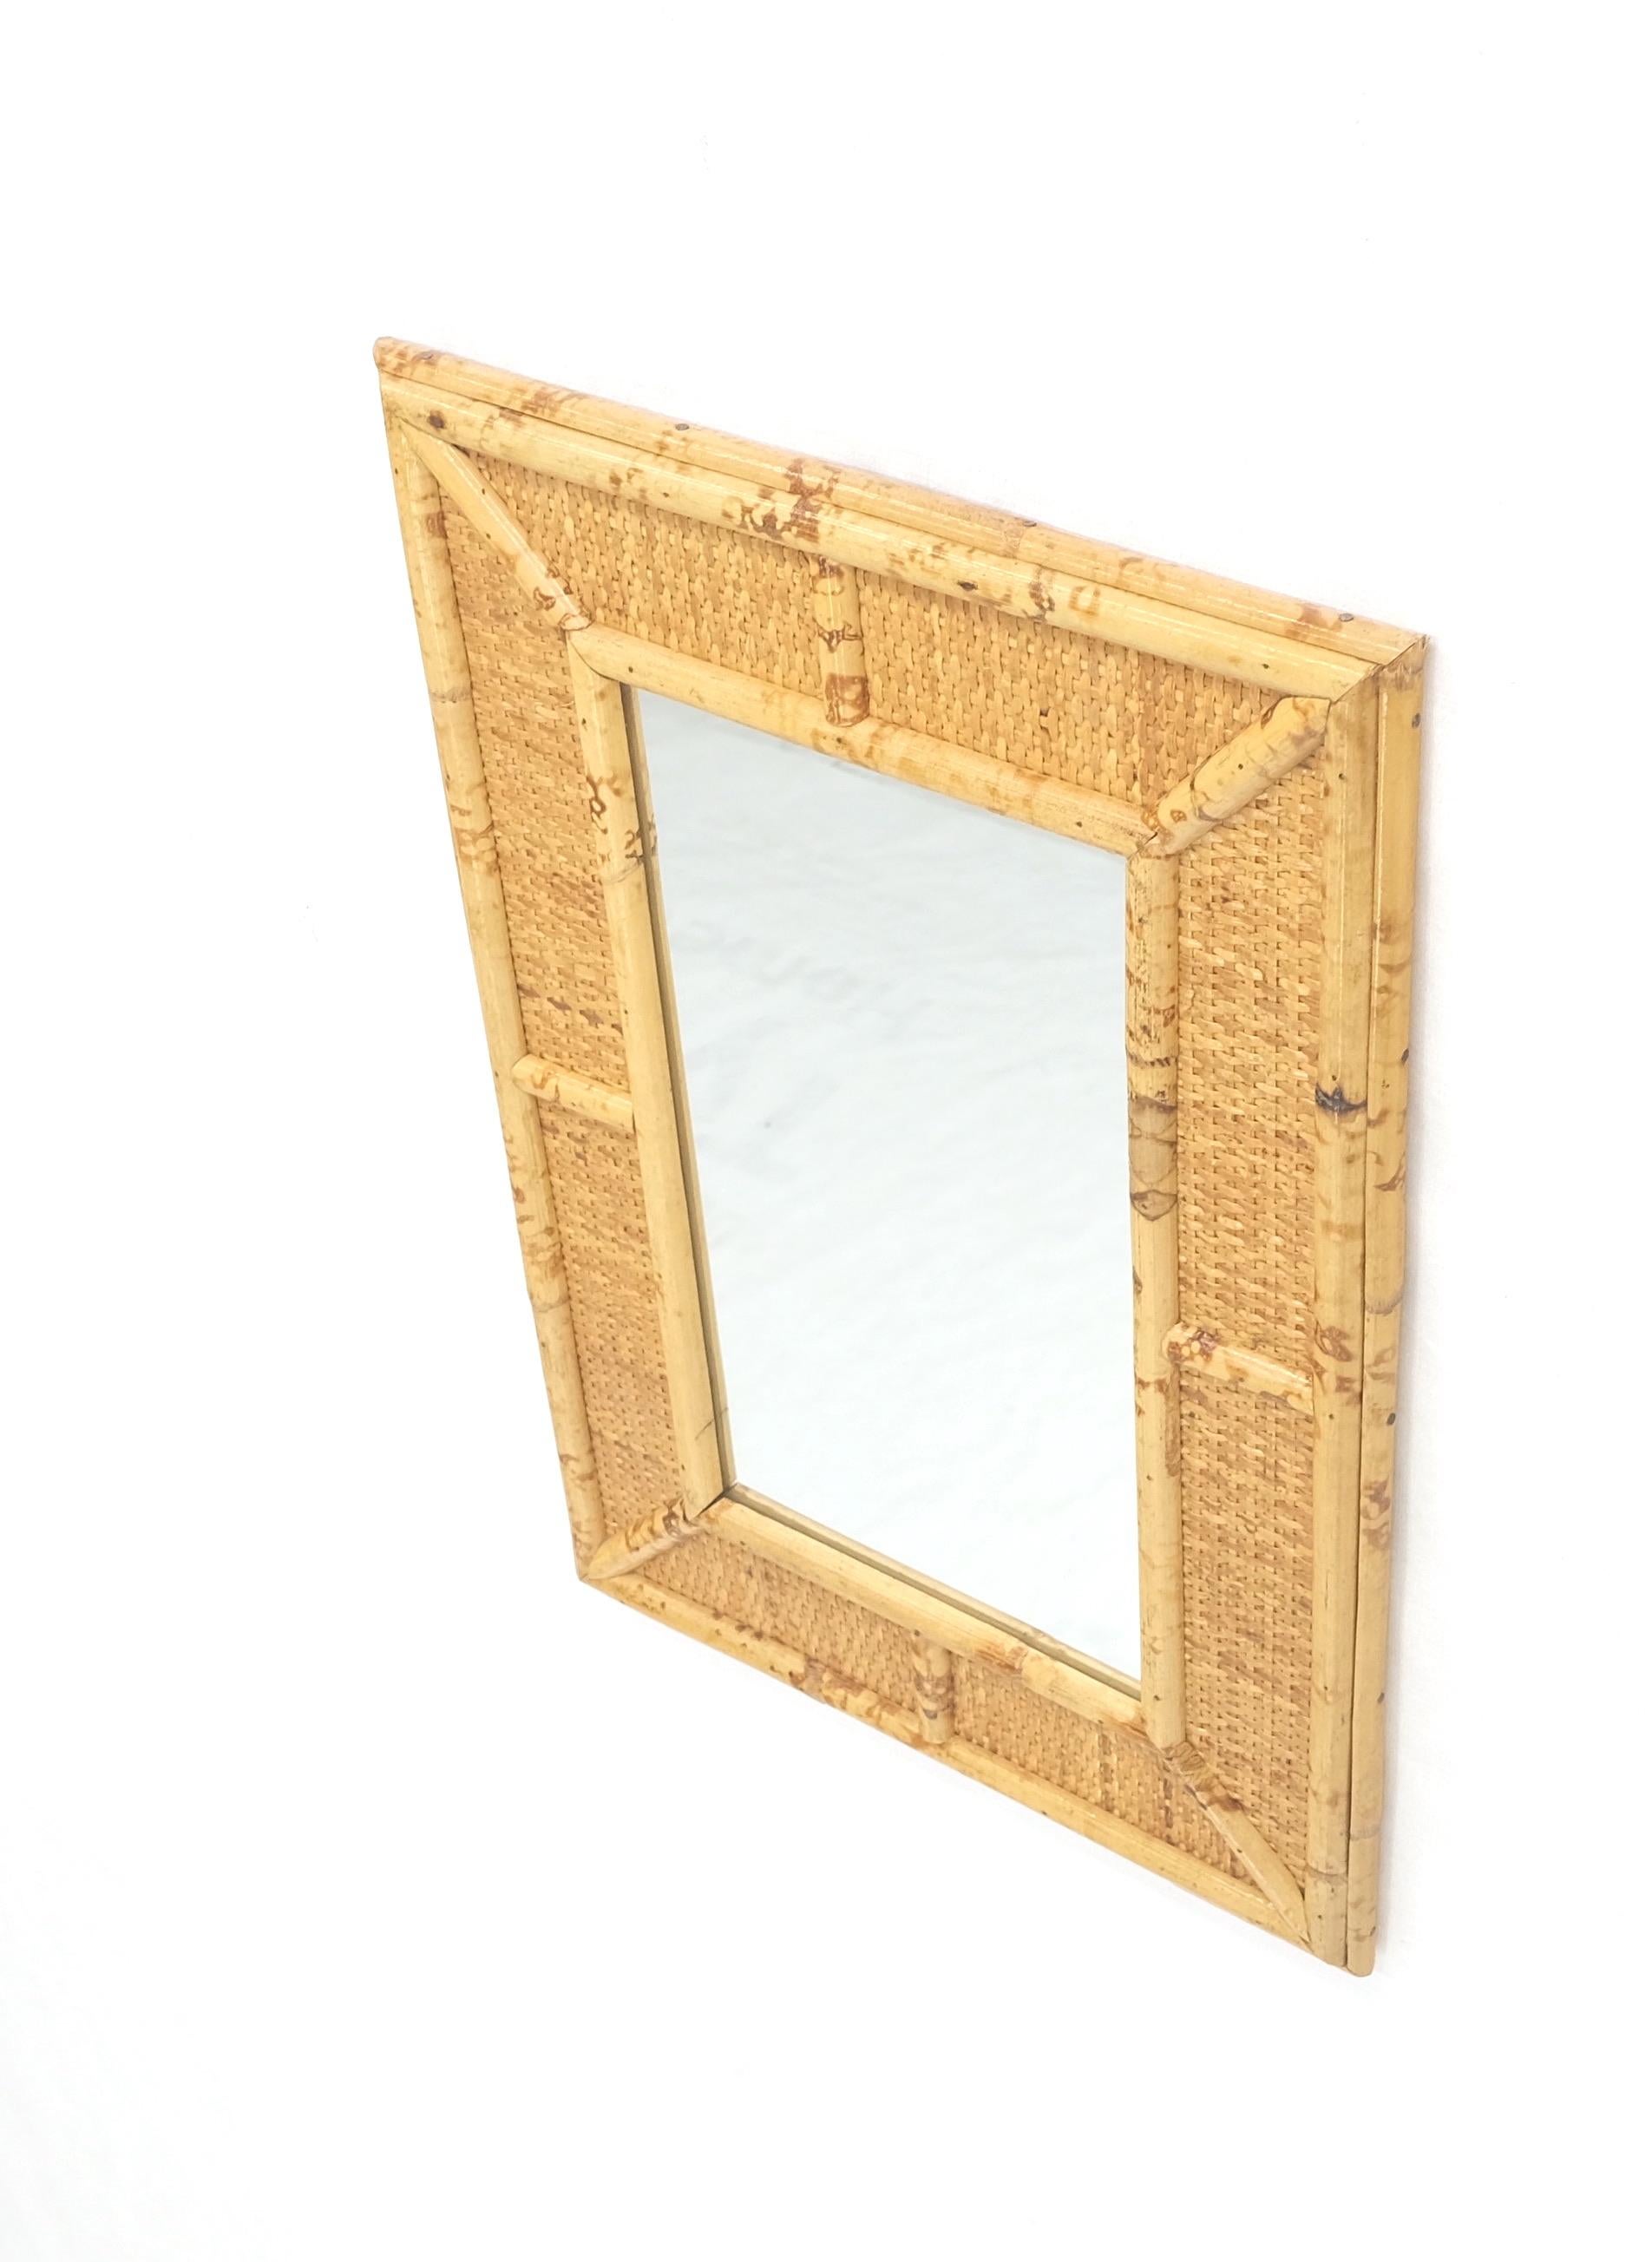 Compact Rectangle Bamboo Frame Decorative Mid Century Modern c1970s Wall Mirror MINT!